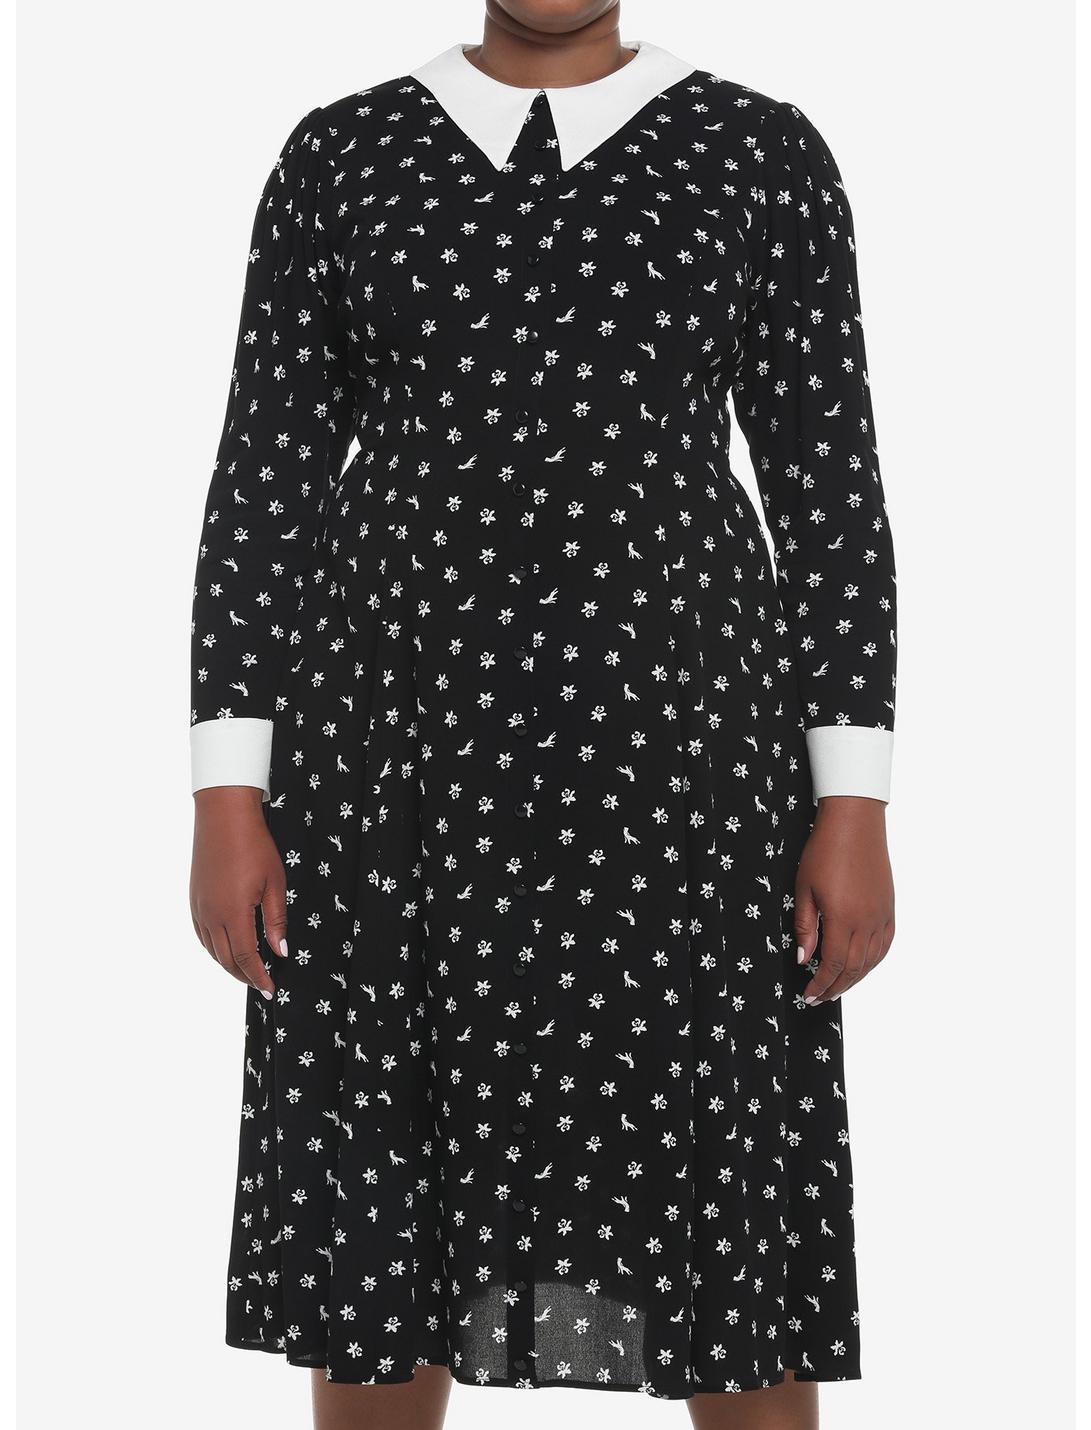 Wednesday Icons Collar Long-Sleeve Dress Plus Size, MULTI, hi-res